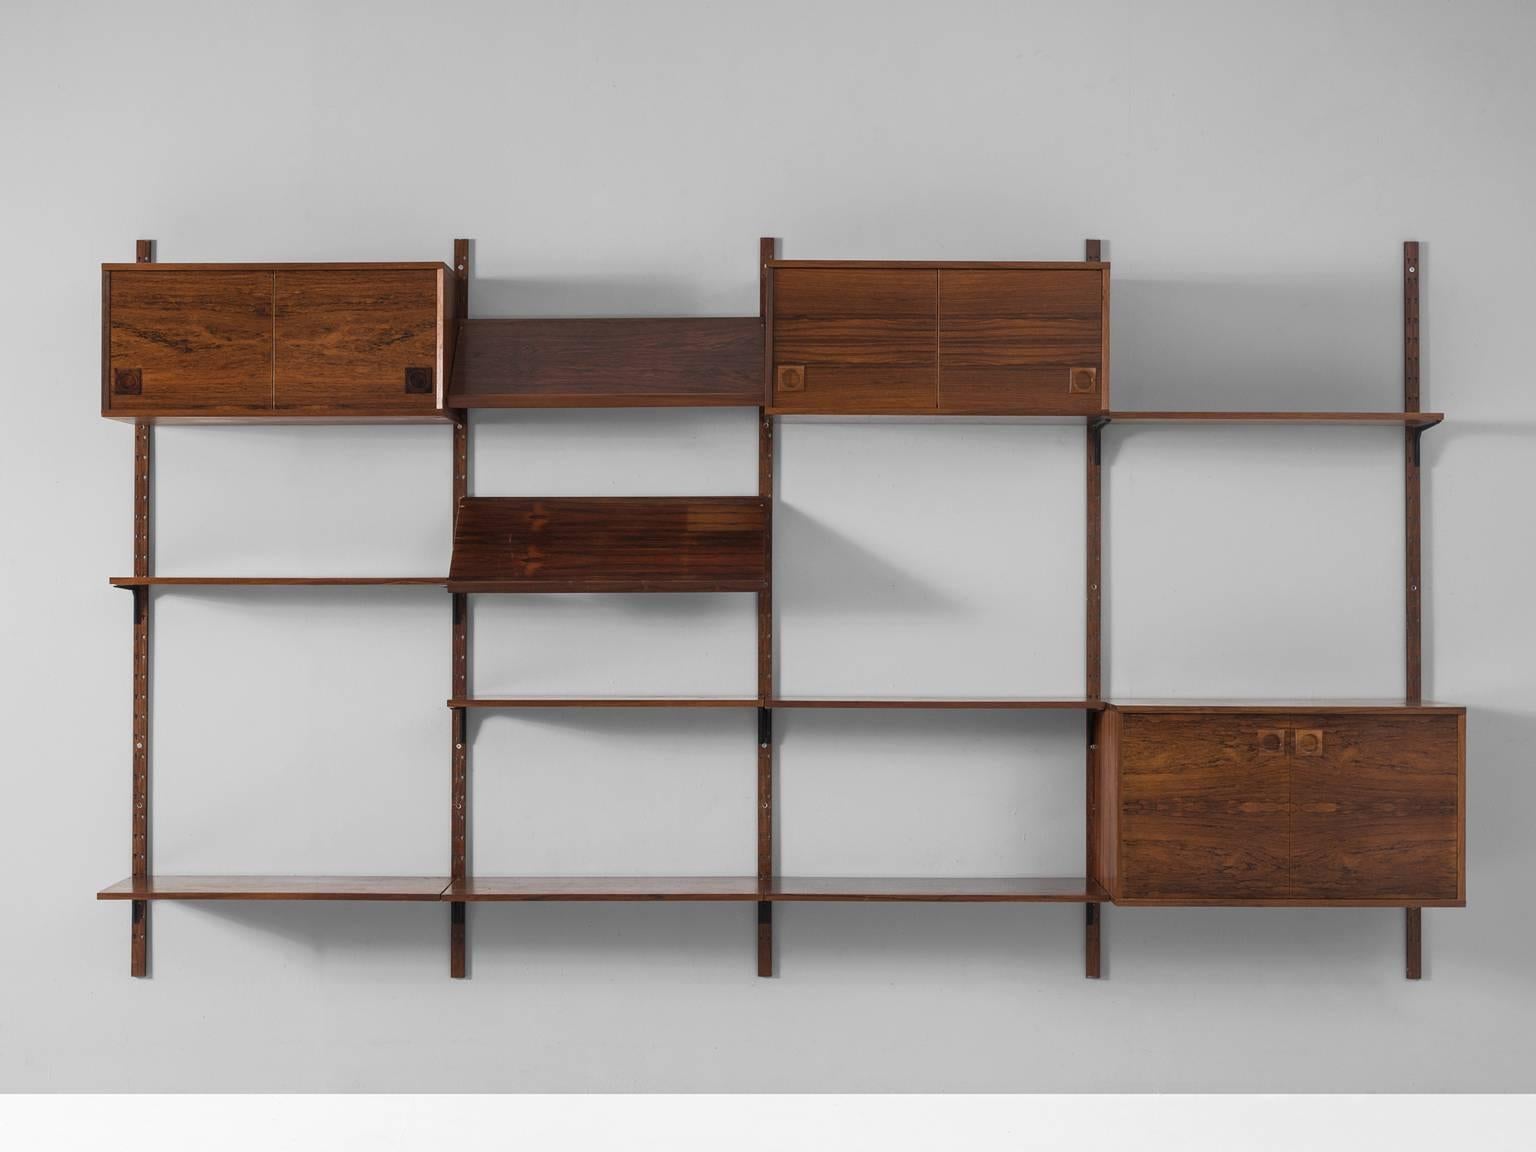 Wall unit, in rosewood and metal, by Albert Hansen, Denmark, 1950s. 

Rosewood shelves and cabinets system by Danish designer Albert Hansen. This cabinet consist of four compartments, which can be arranged to your own wishes. Interesting part are